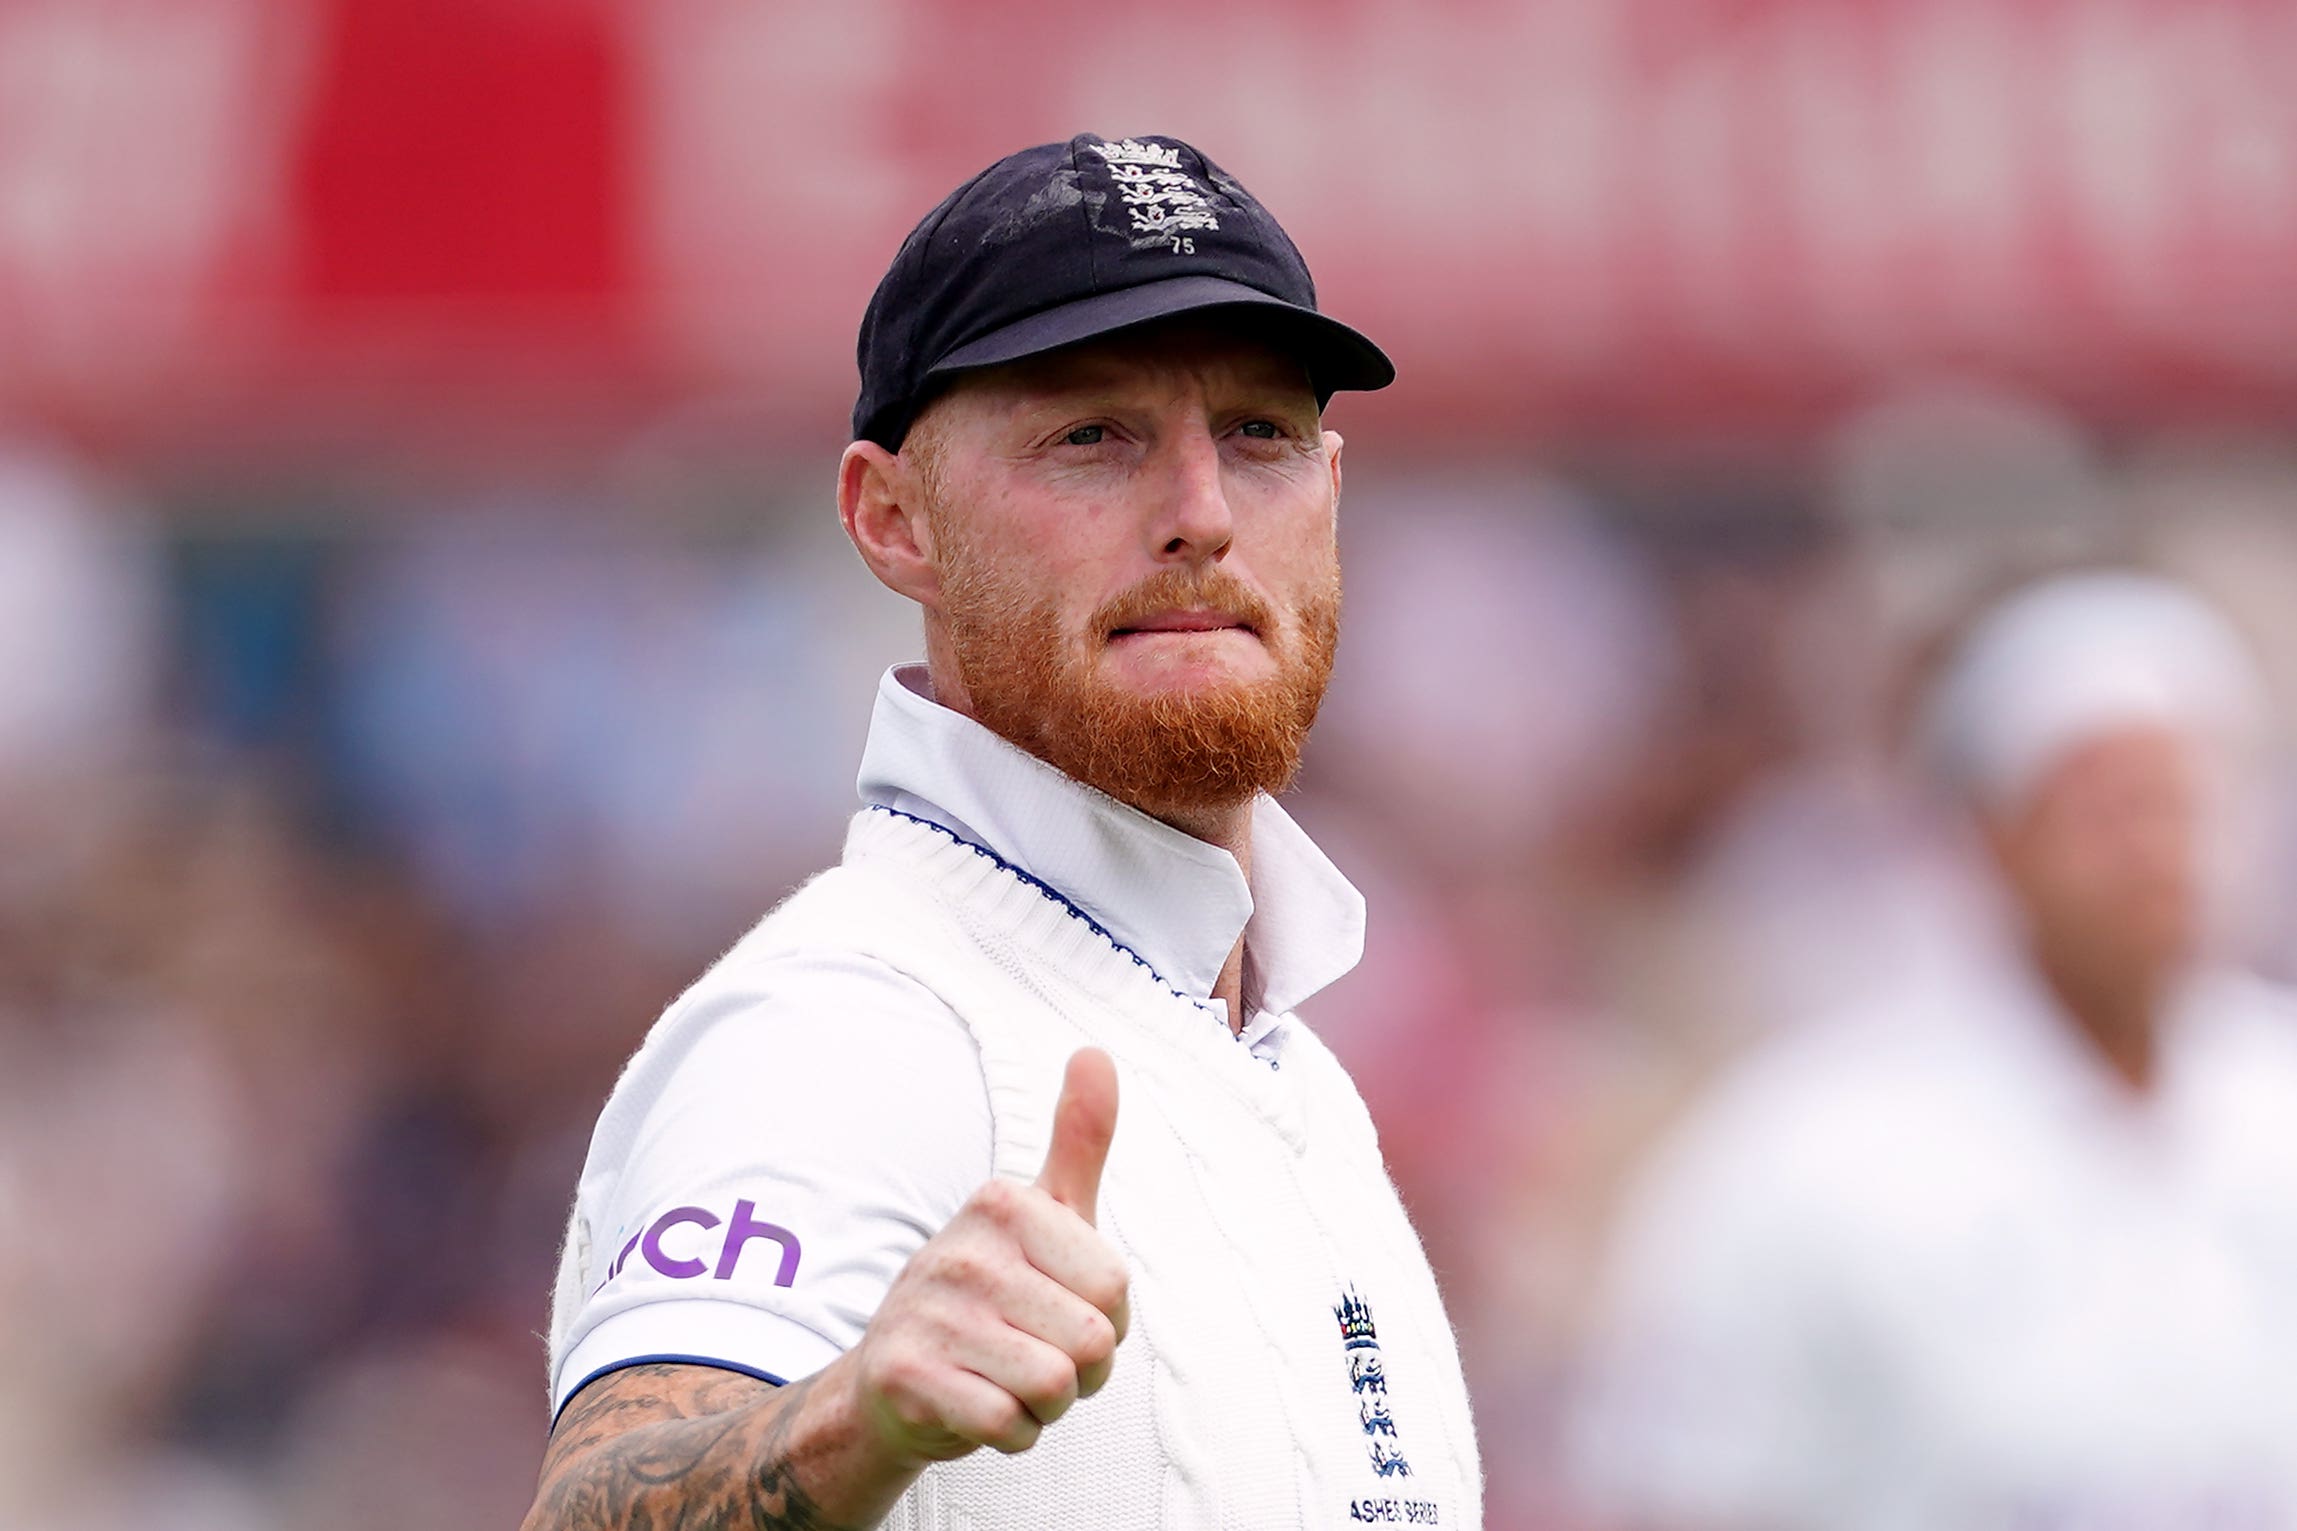 Day three of fourth Ashes Test England seek to turn the screw